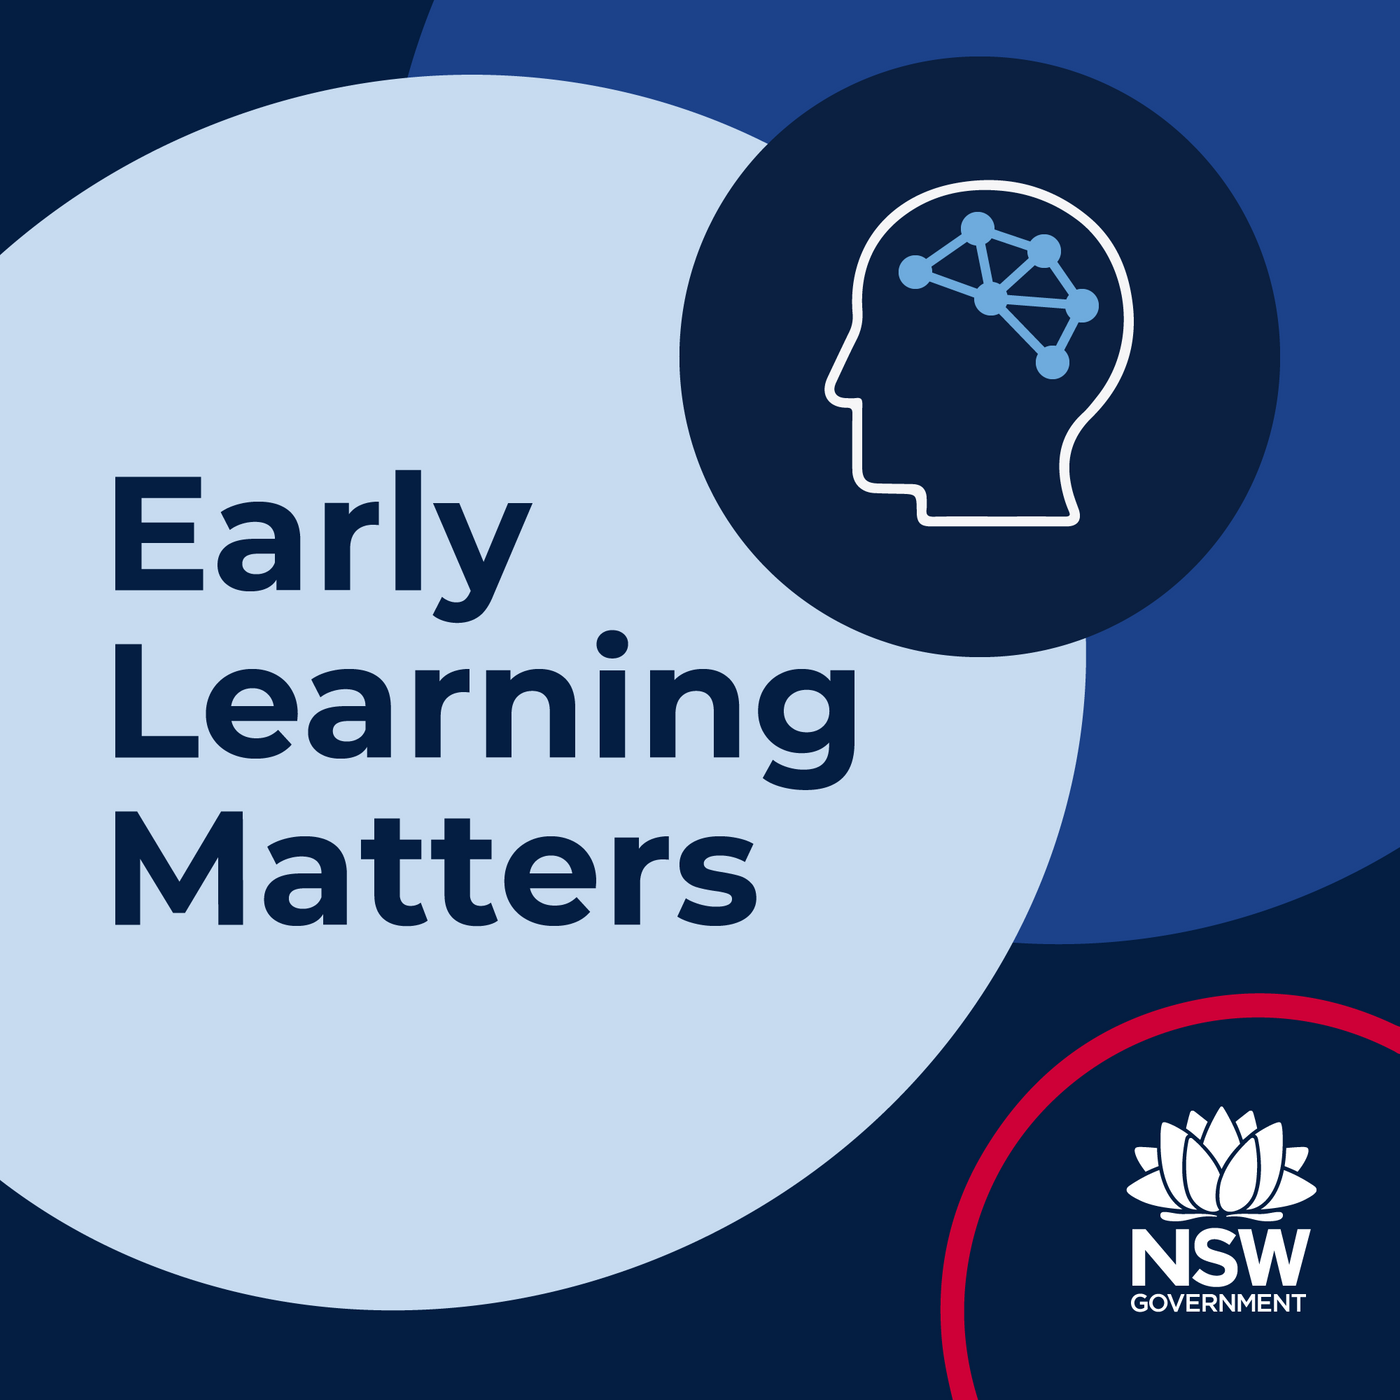 Effective assessment in early childhood